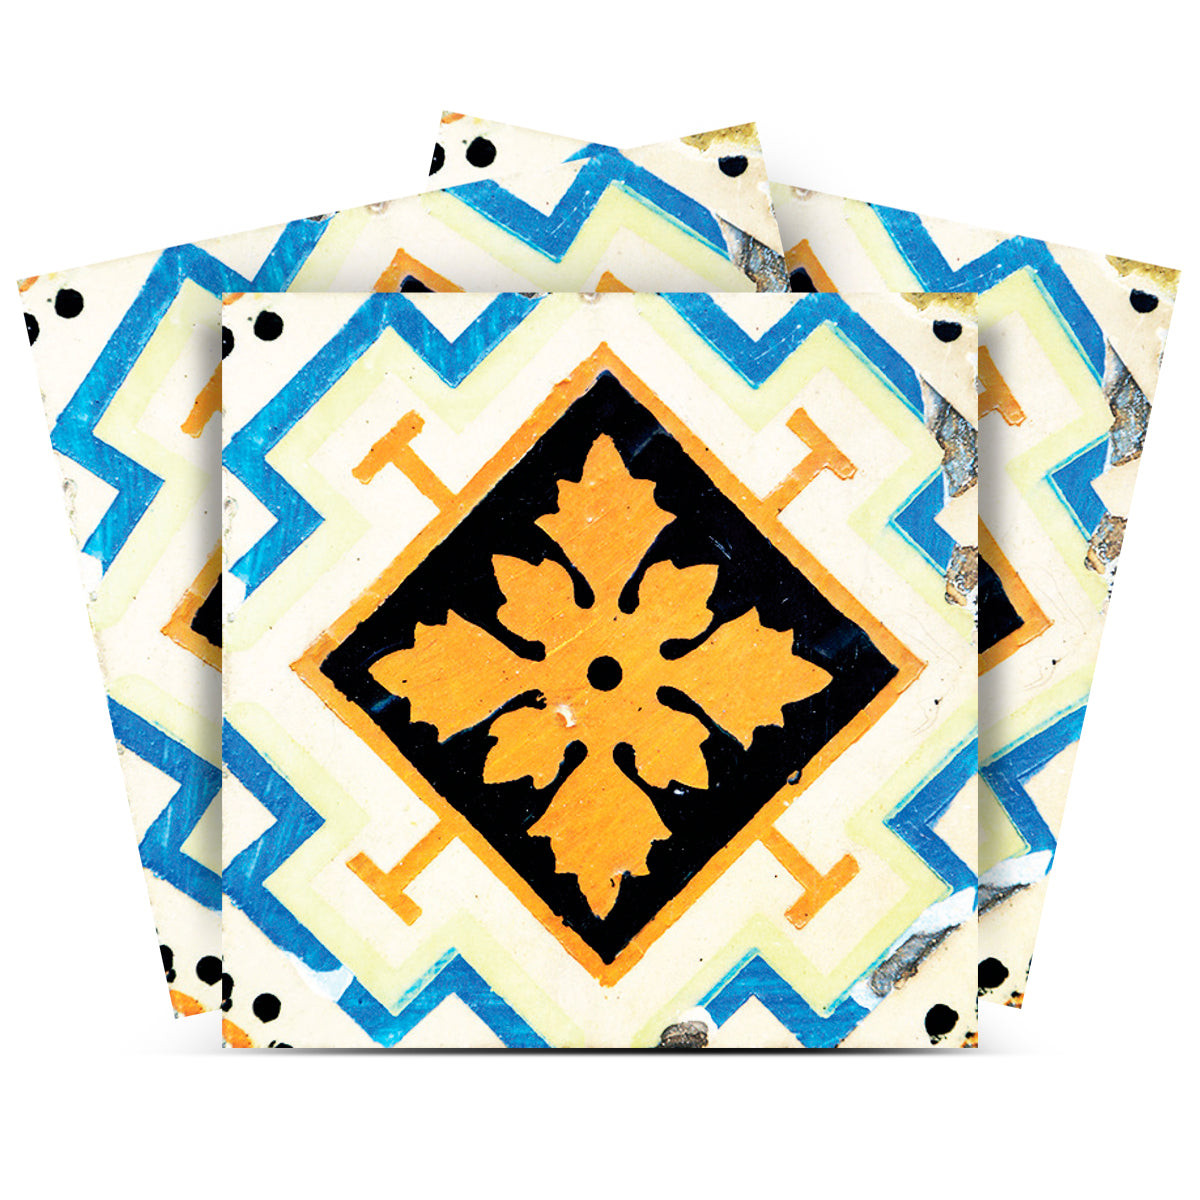 4" x 4" Gold Snowflake Peel and Stick Removable Tiles-400484-1